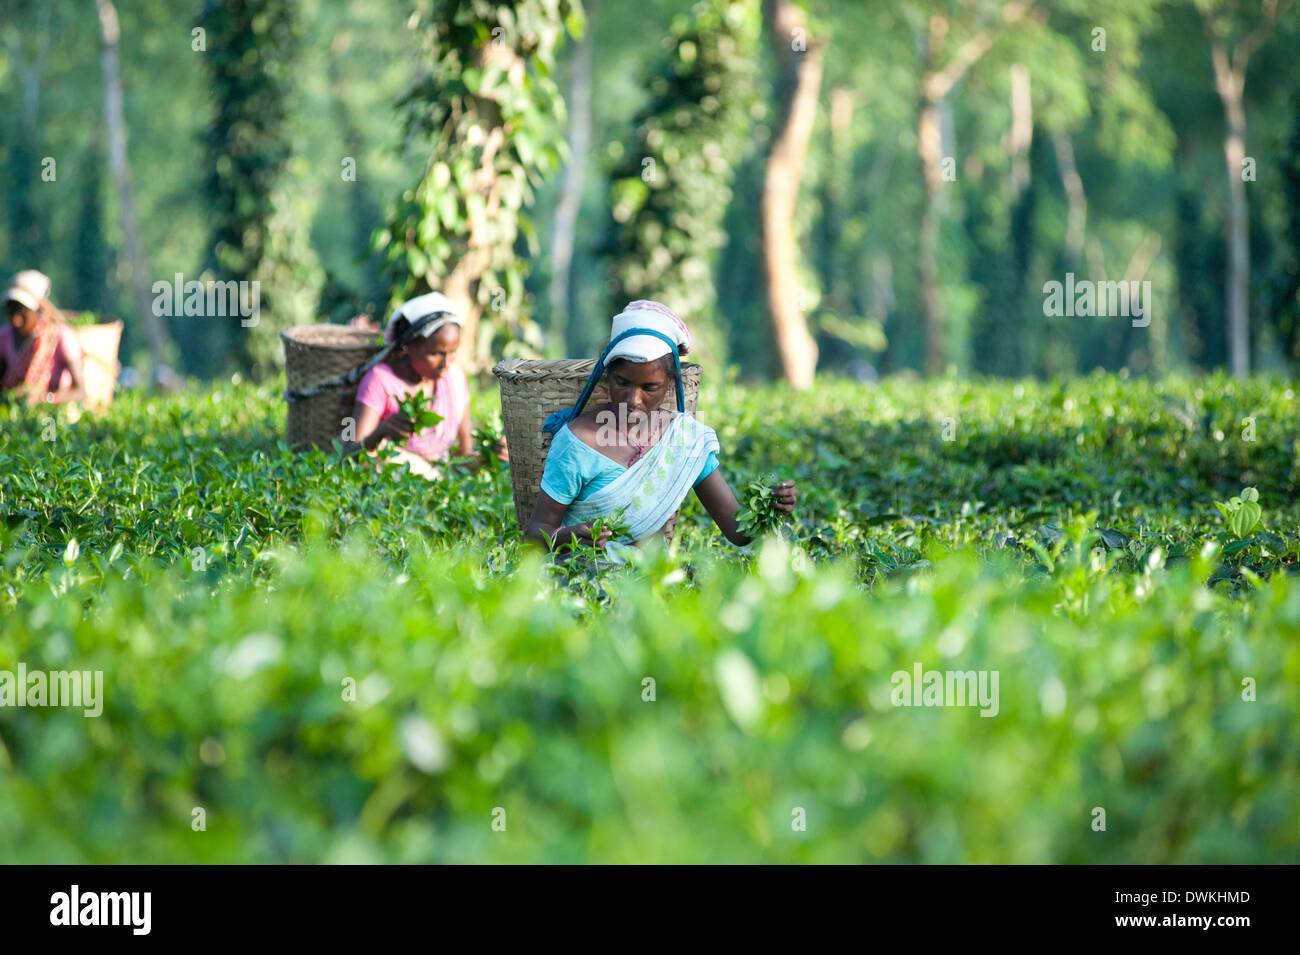 Female tea pickers working in a tea plantation amongst trees and climbing pepper plants, Jorhat district, Assam, India, Asia Stock Photo